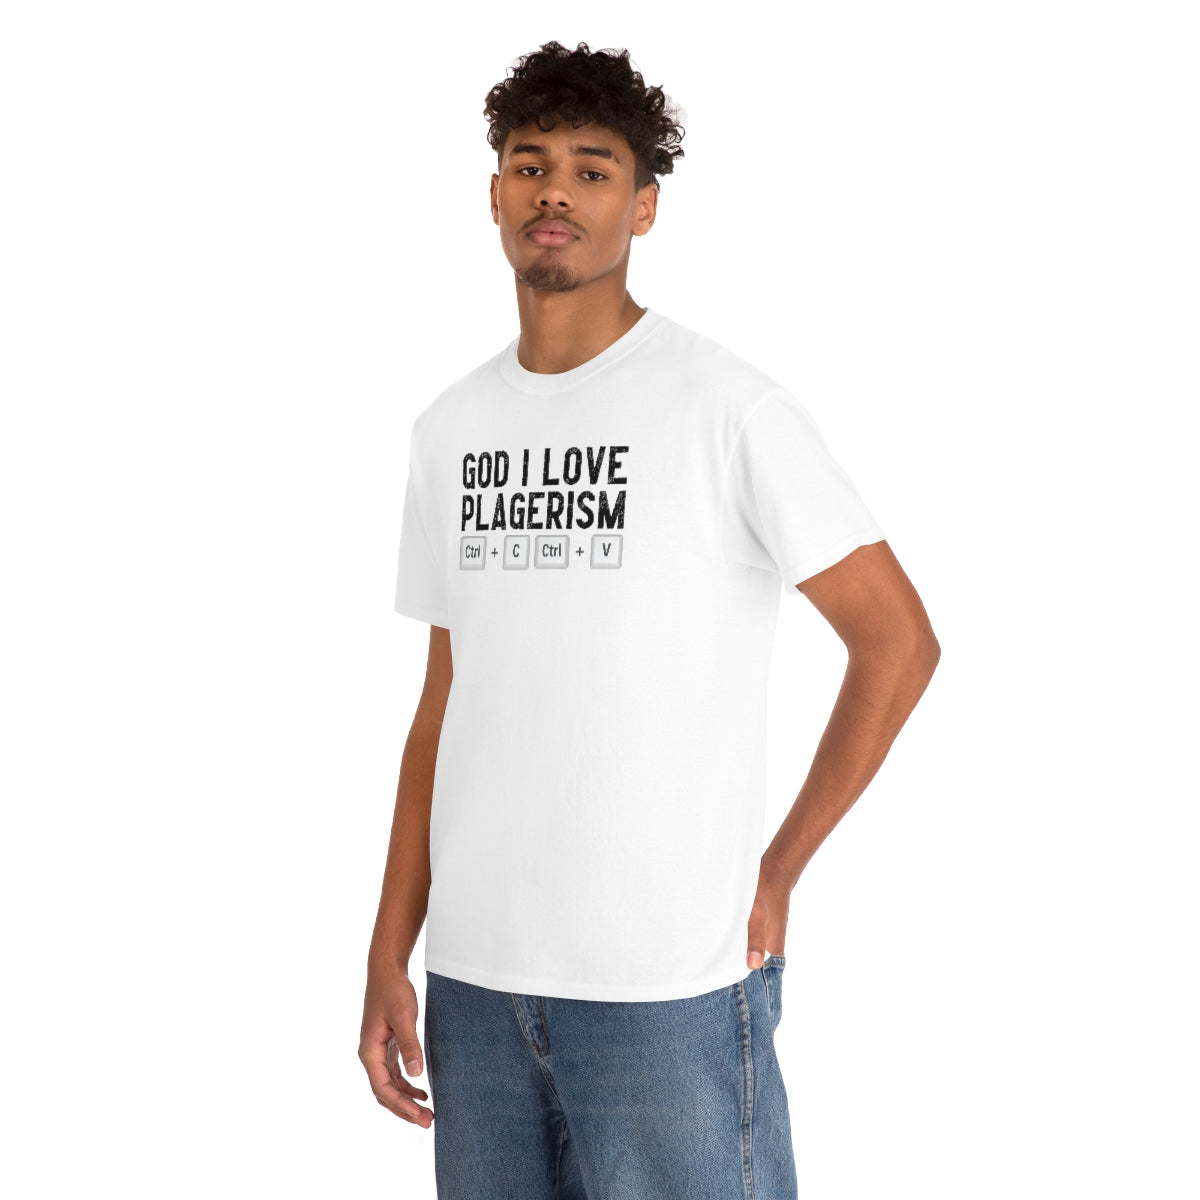 God I Love Plagerism - Unisex Heavy Cotton Tee - All Colors